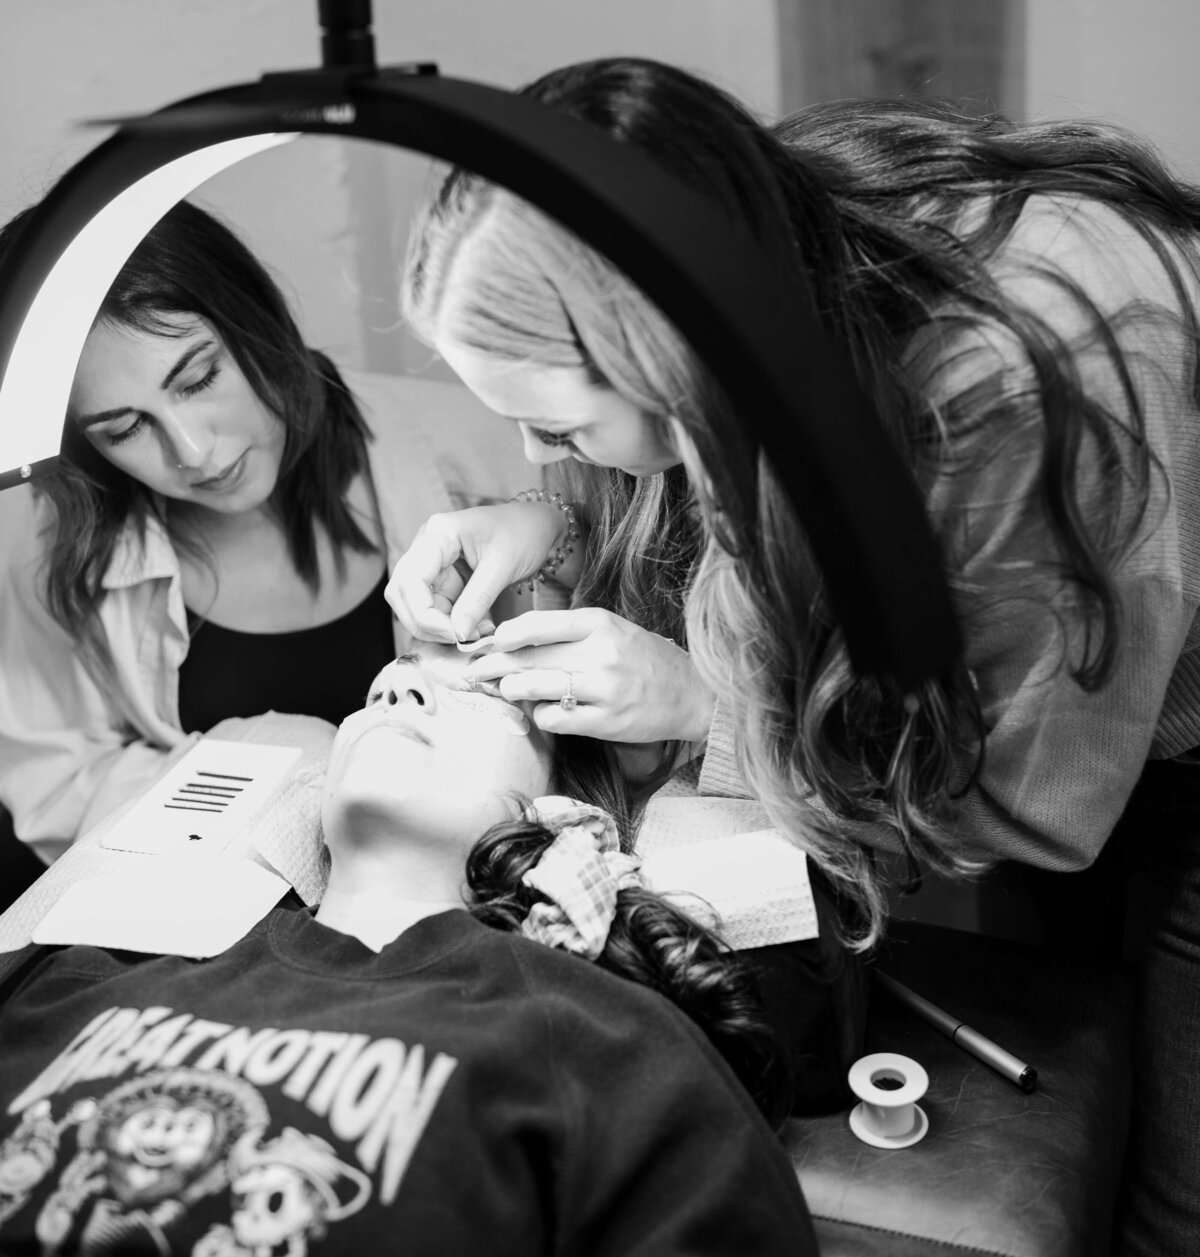 Owner of Milan Esthetics in Corvallis helps another artist learn how to apply lashes